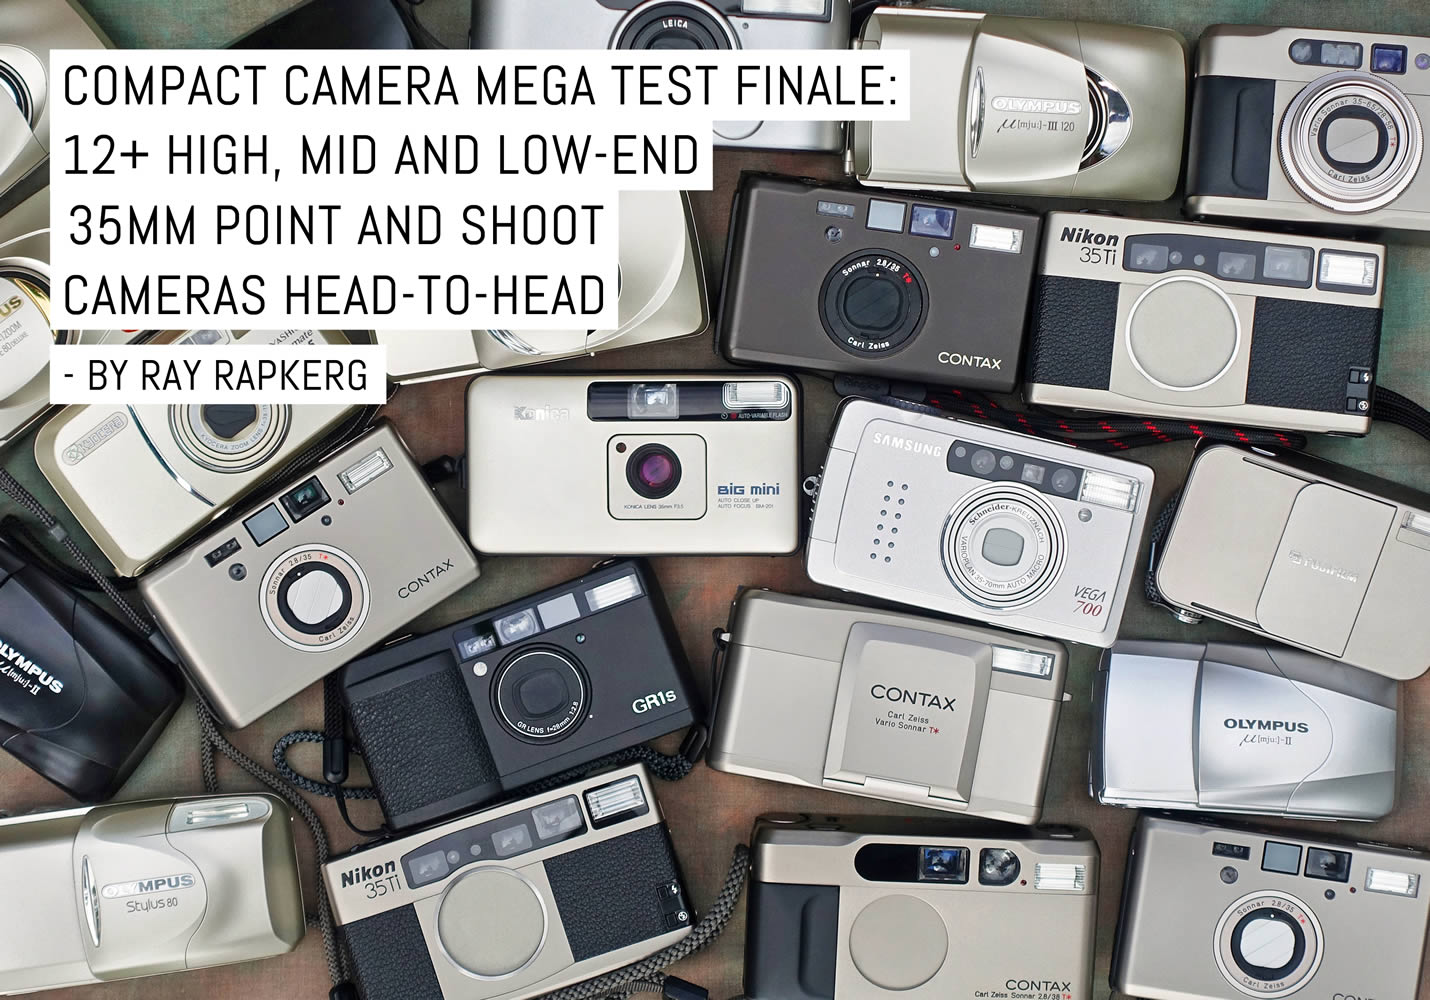 Compact camera mega test finale: 12+ high, mid and low-end 35mm point and shoot cameras head-to-head